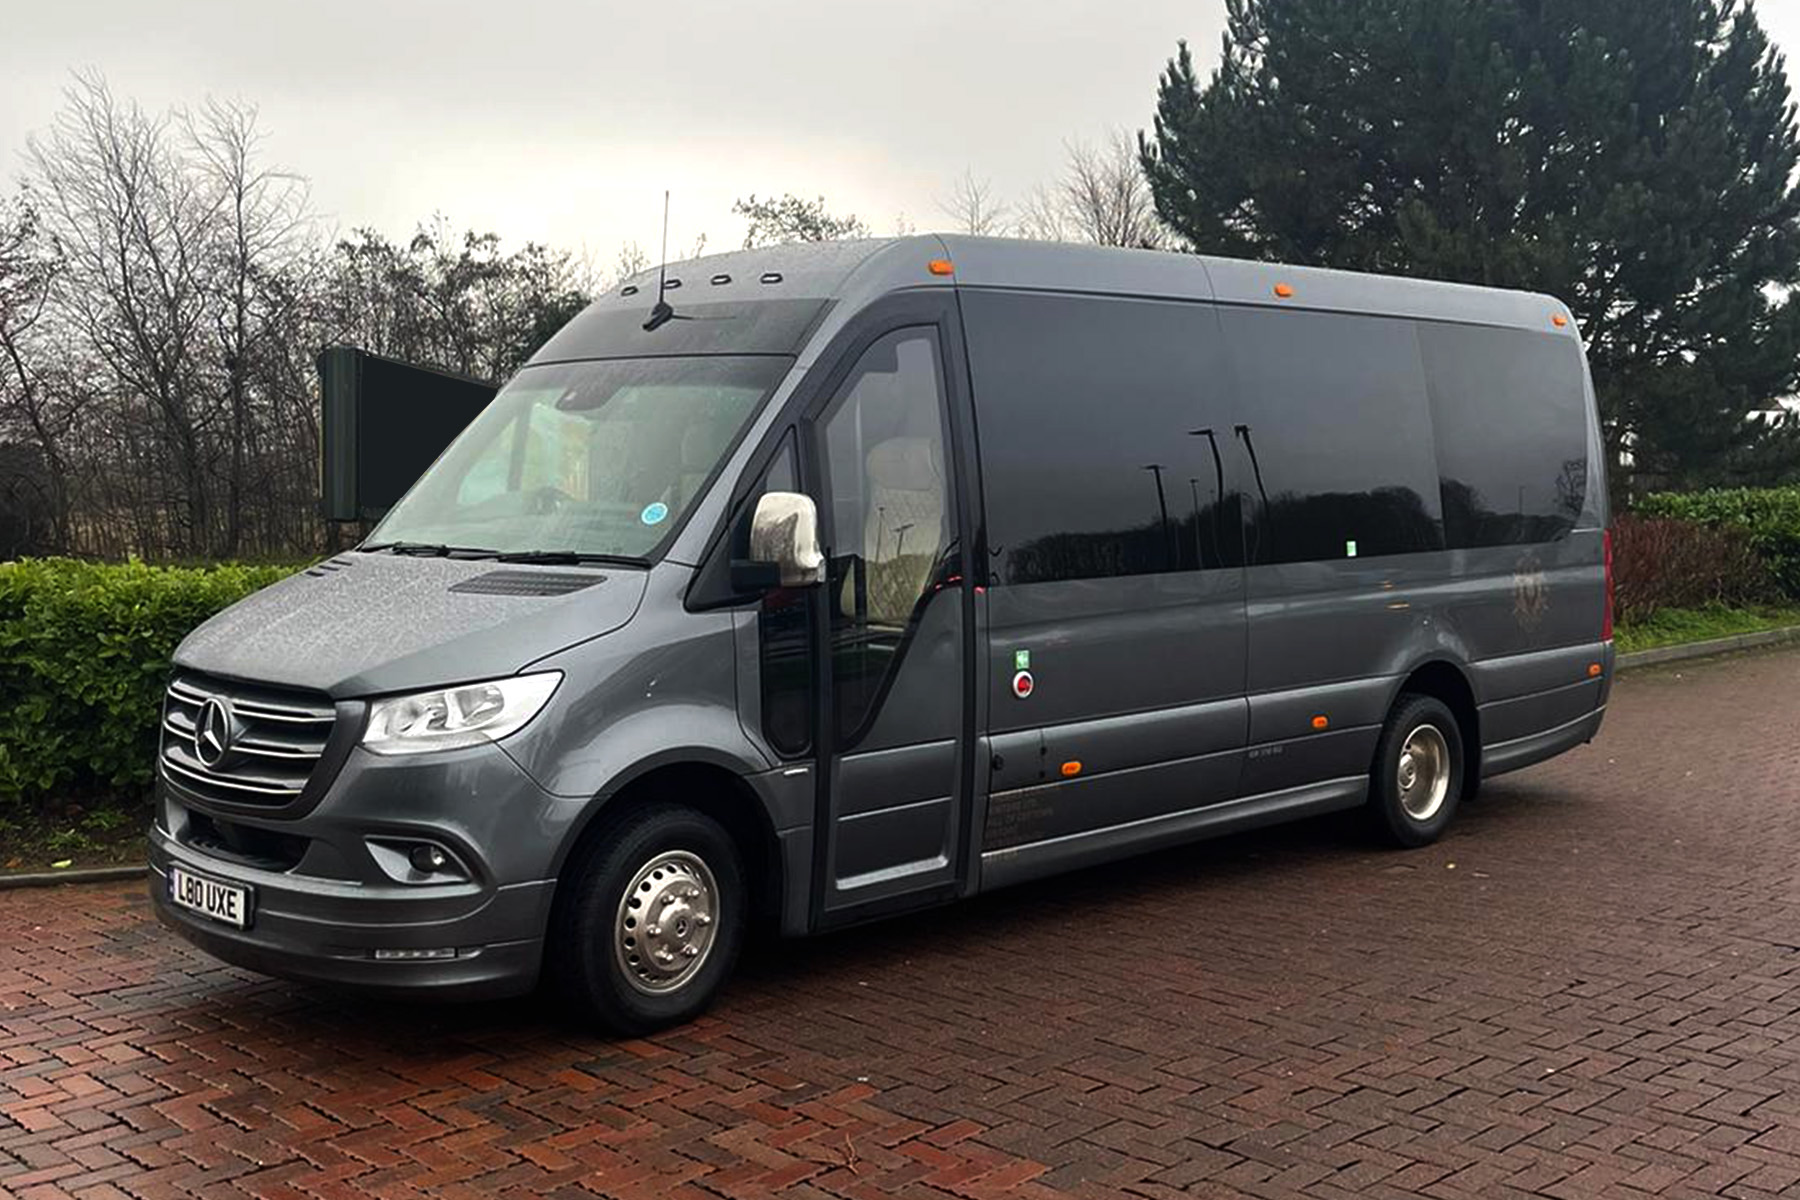 Minibus Hire for the EFL Championship play-offs in Wembley